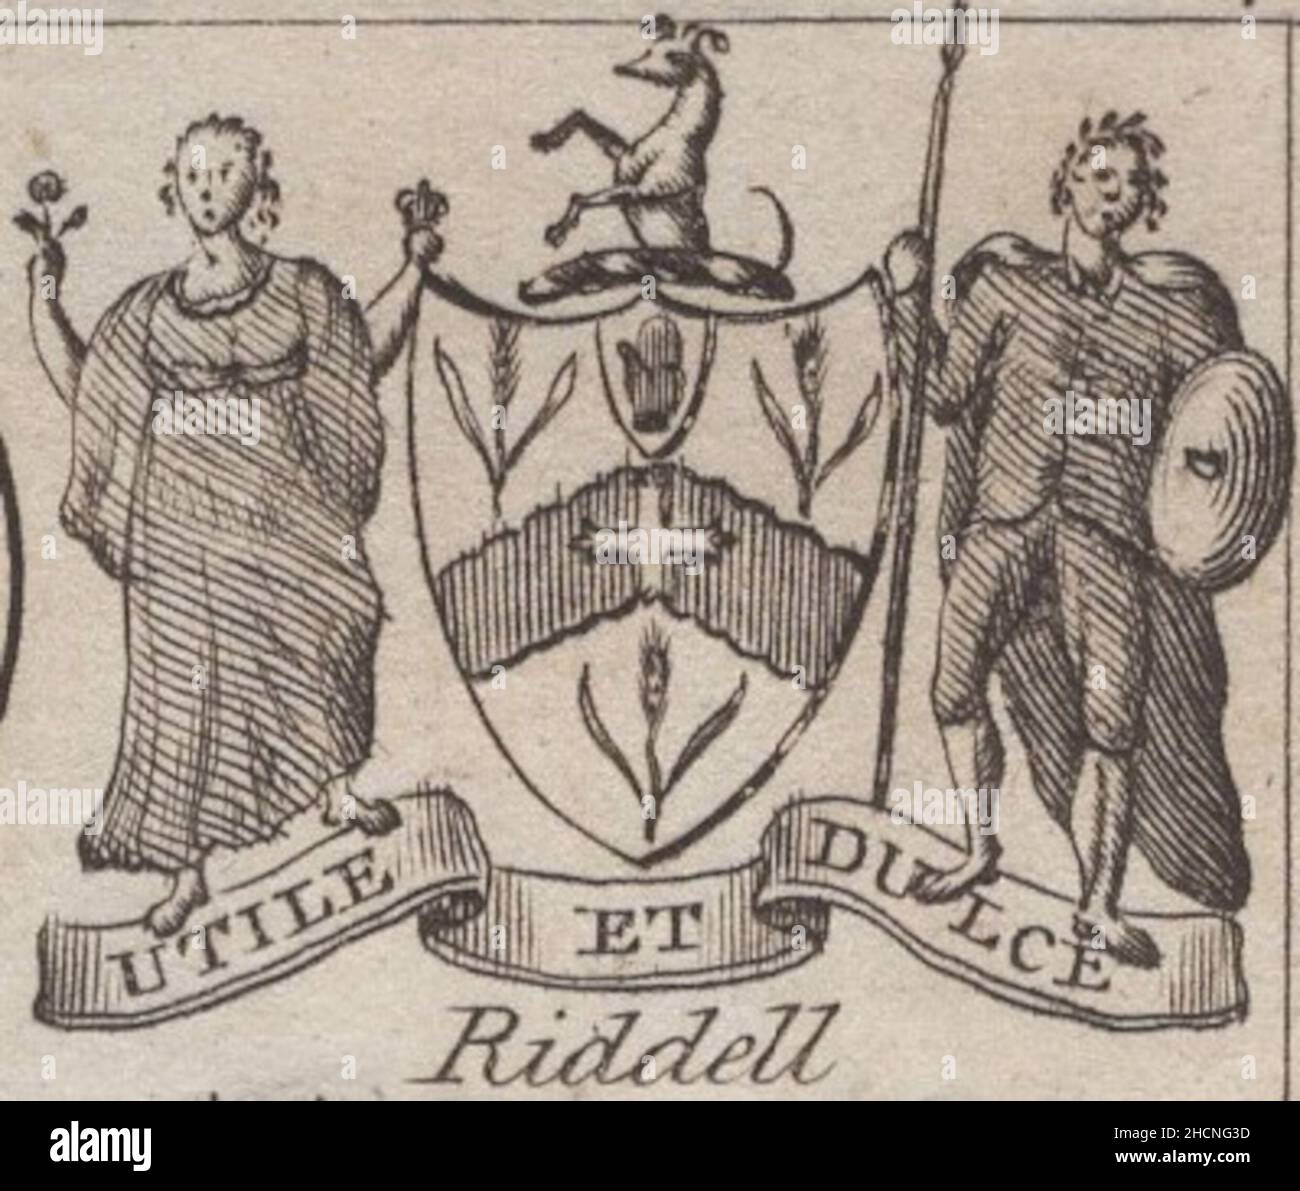 antique 18th century engraving heraldy coat of arms, English Baronet Riddell with slogan / motto : Utile et Dulce by Woodman & Mutlow fc russel co circa 1780s Source: original engravings from  the annual almanach book. Stock Photo